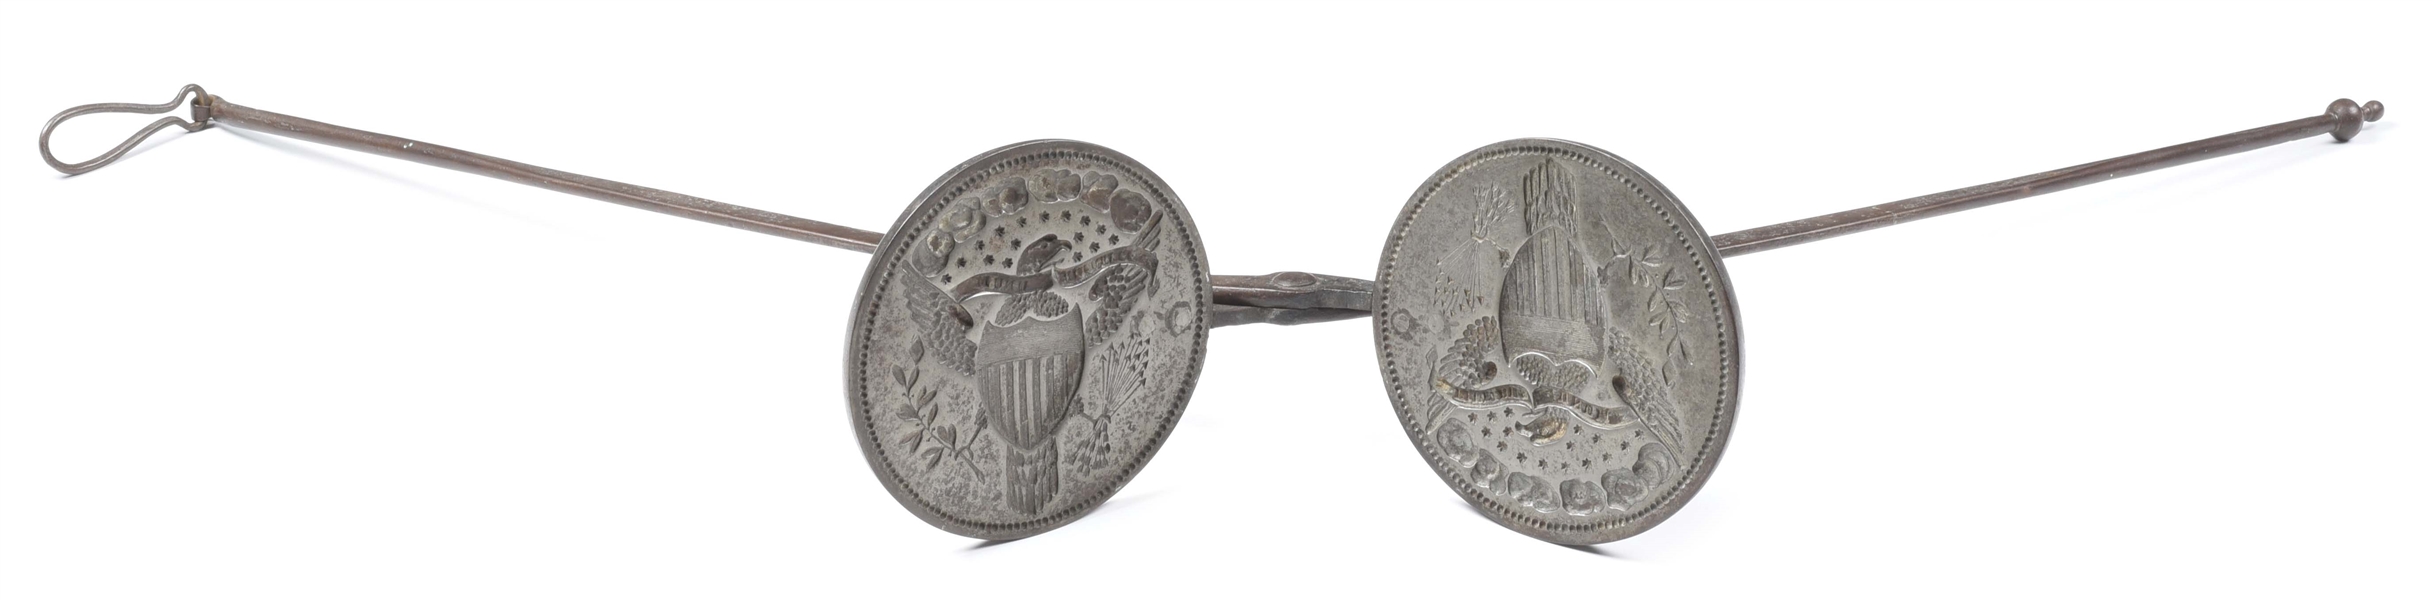 EARLY 19TH CENTURY PATRIOTIC GREAT SEAL WAFER IRON.